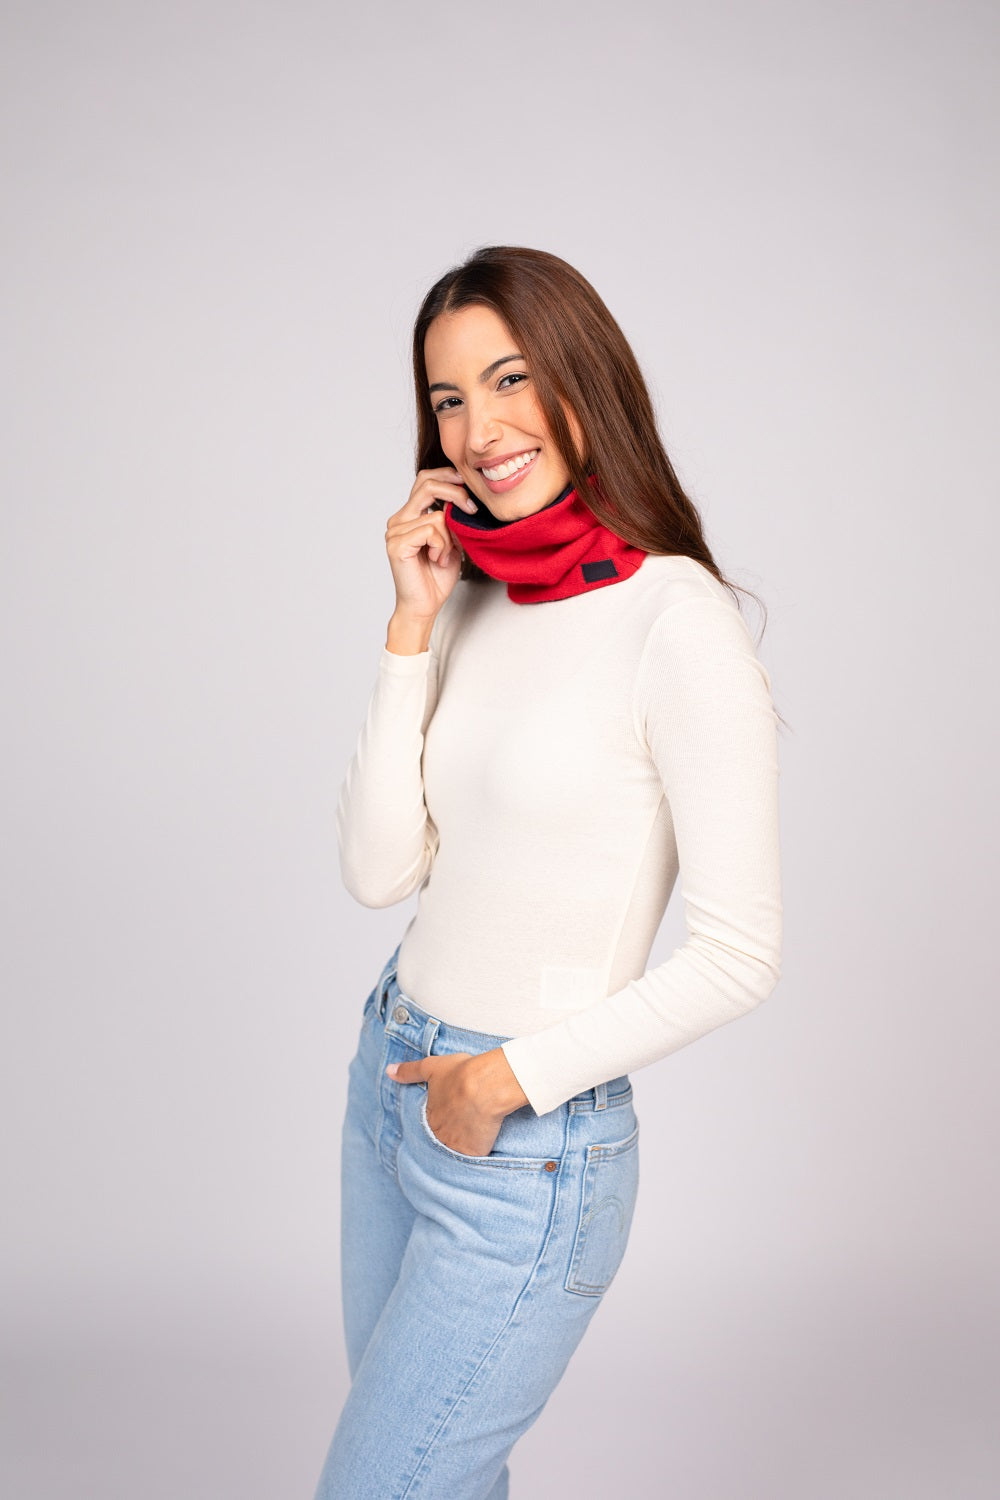 Autumn Neckwarmer Set - Light Gray and Dark Gray, Beige and Light Brown, Red and Navy